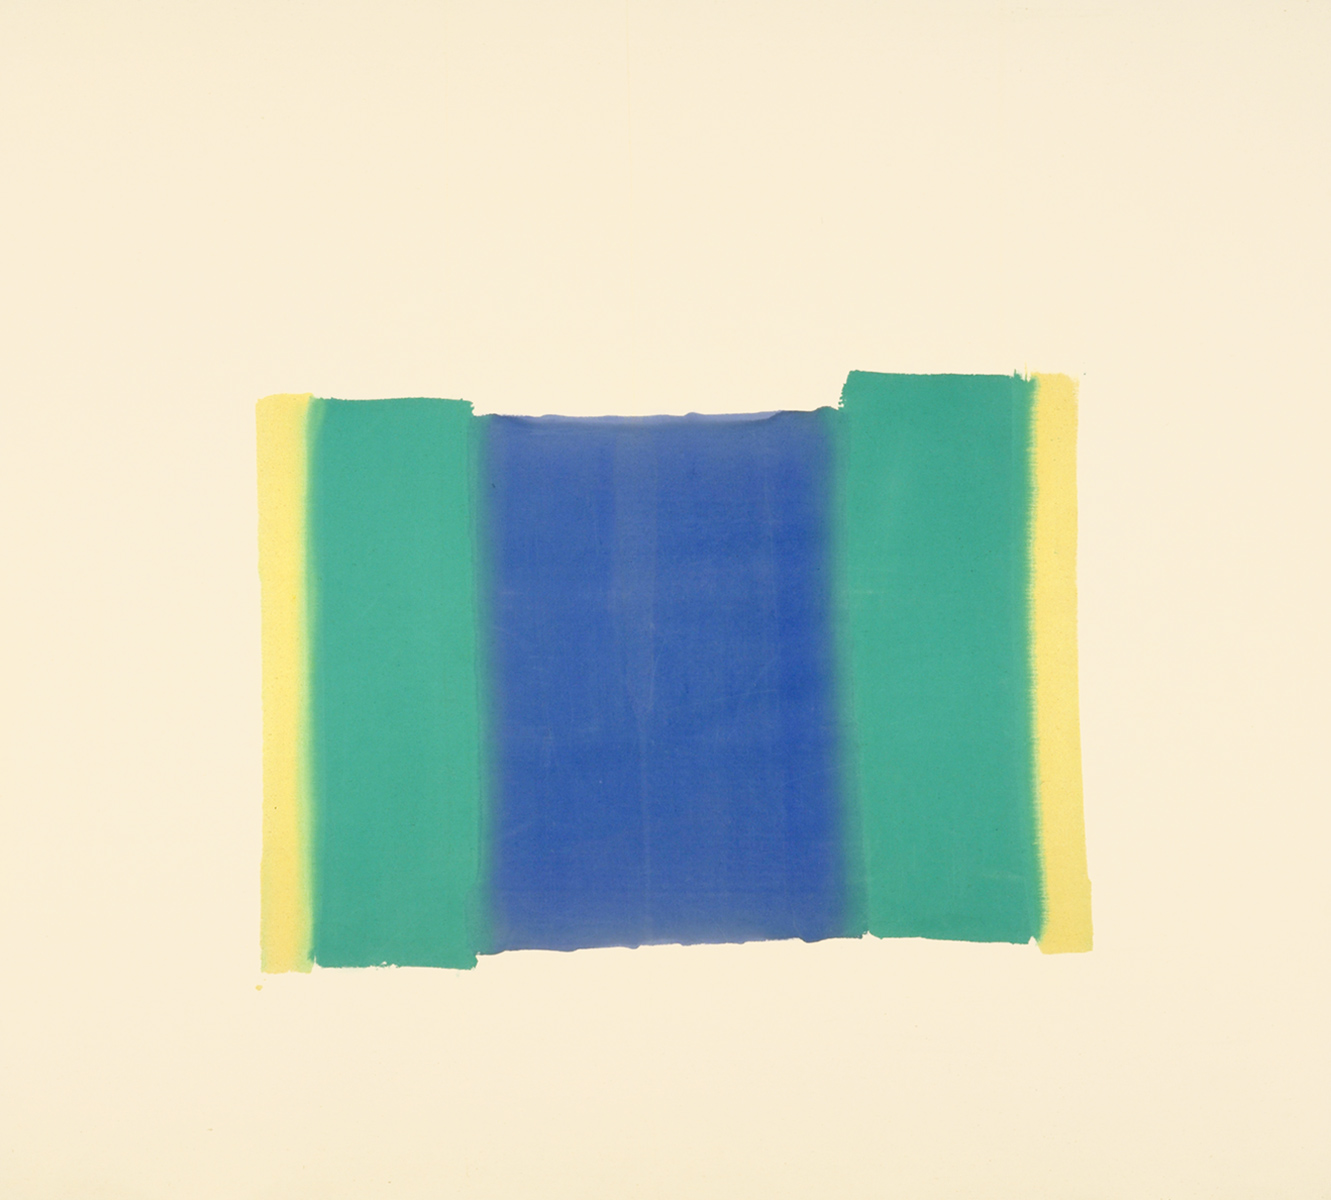 Painting on a beige background of a thick blue vertical stripe bordered on the left and right by thinner green stripes and even thinner yellow stripes.